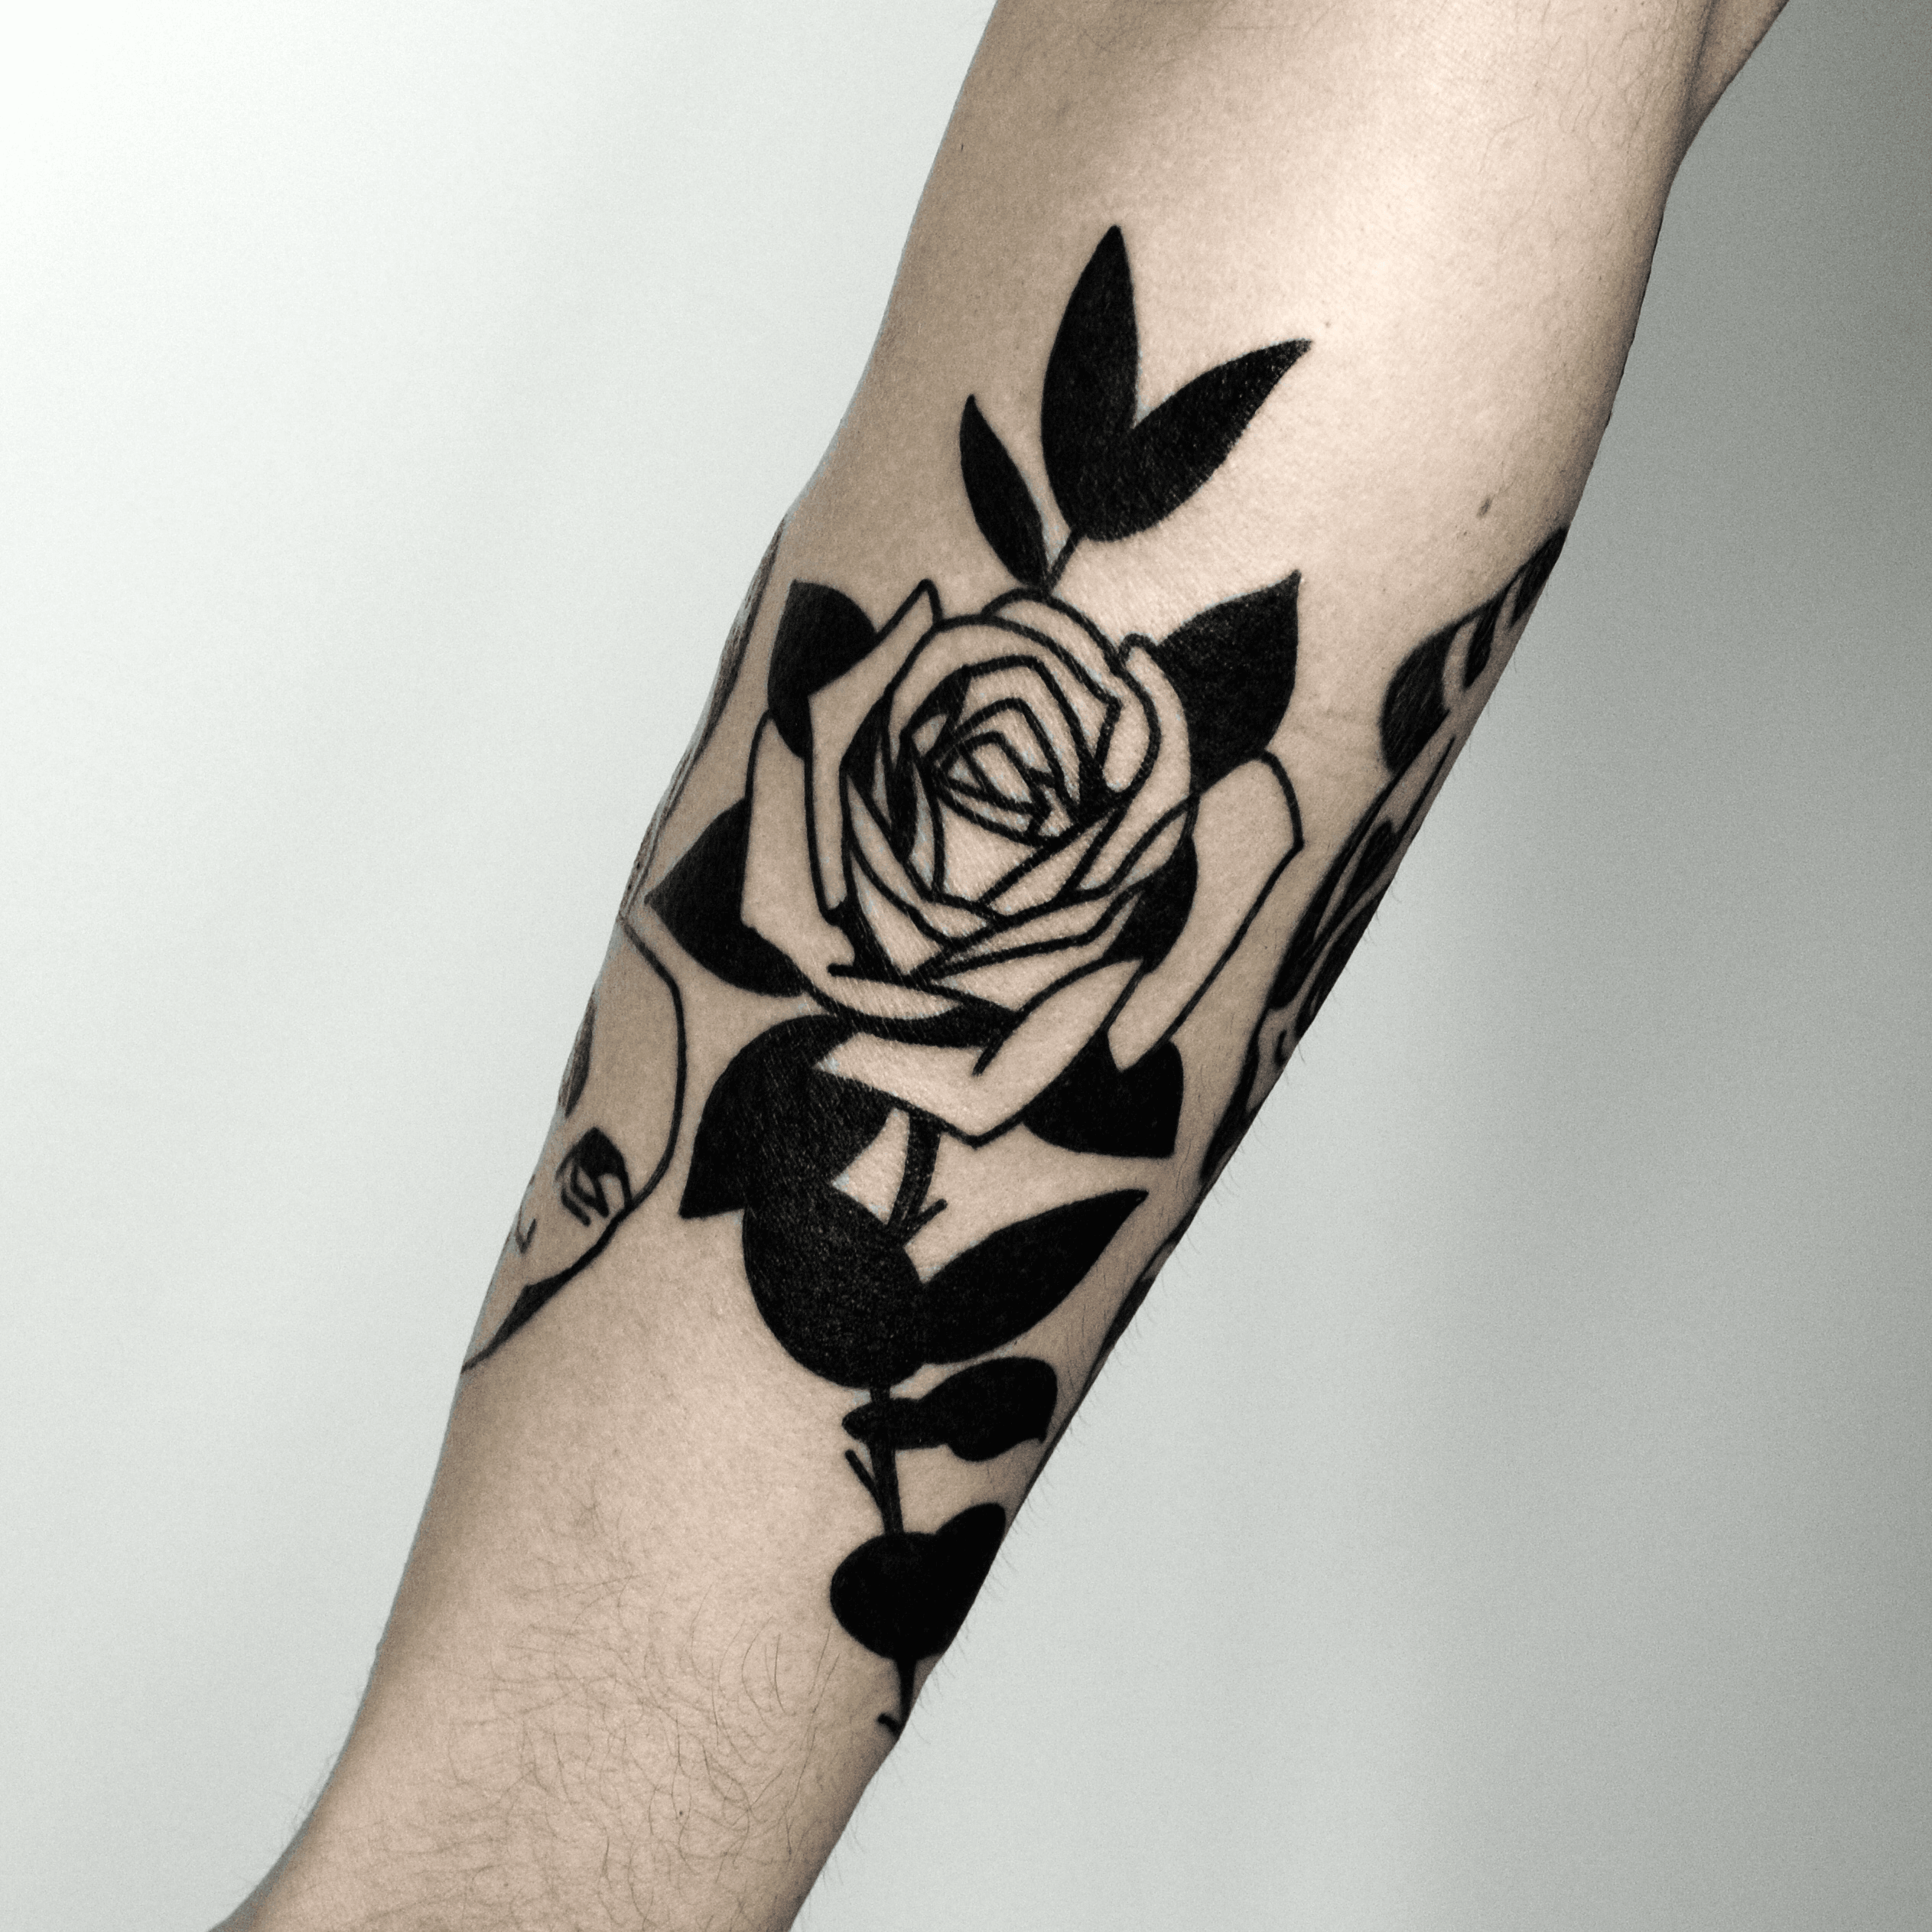 Traditional Rose Tattoo 40 Ideas for Classic Tattoos and Flowers Lovers